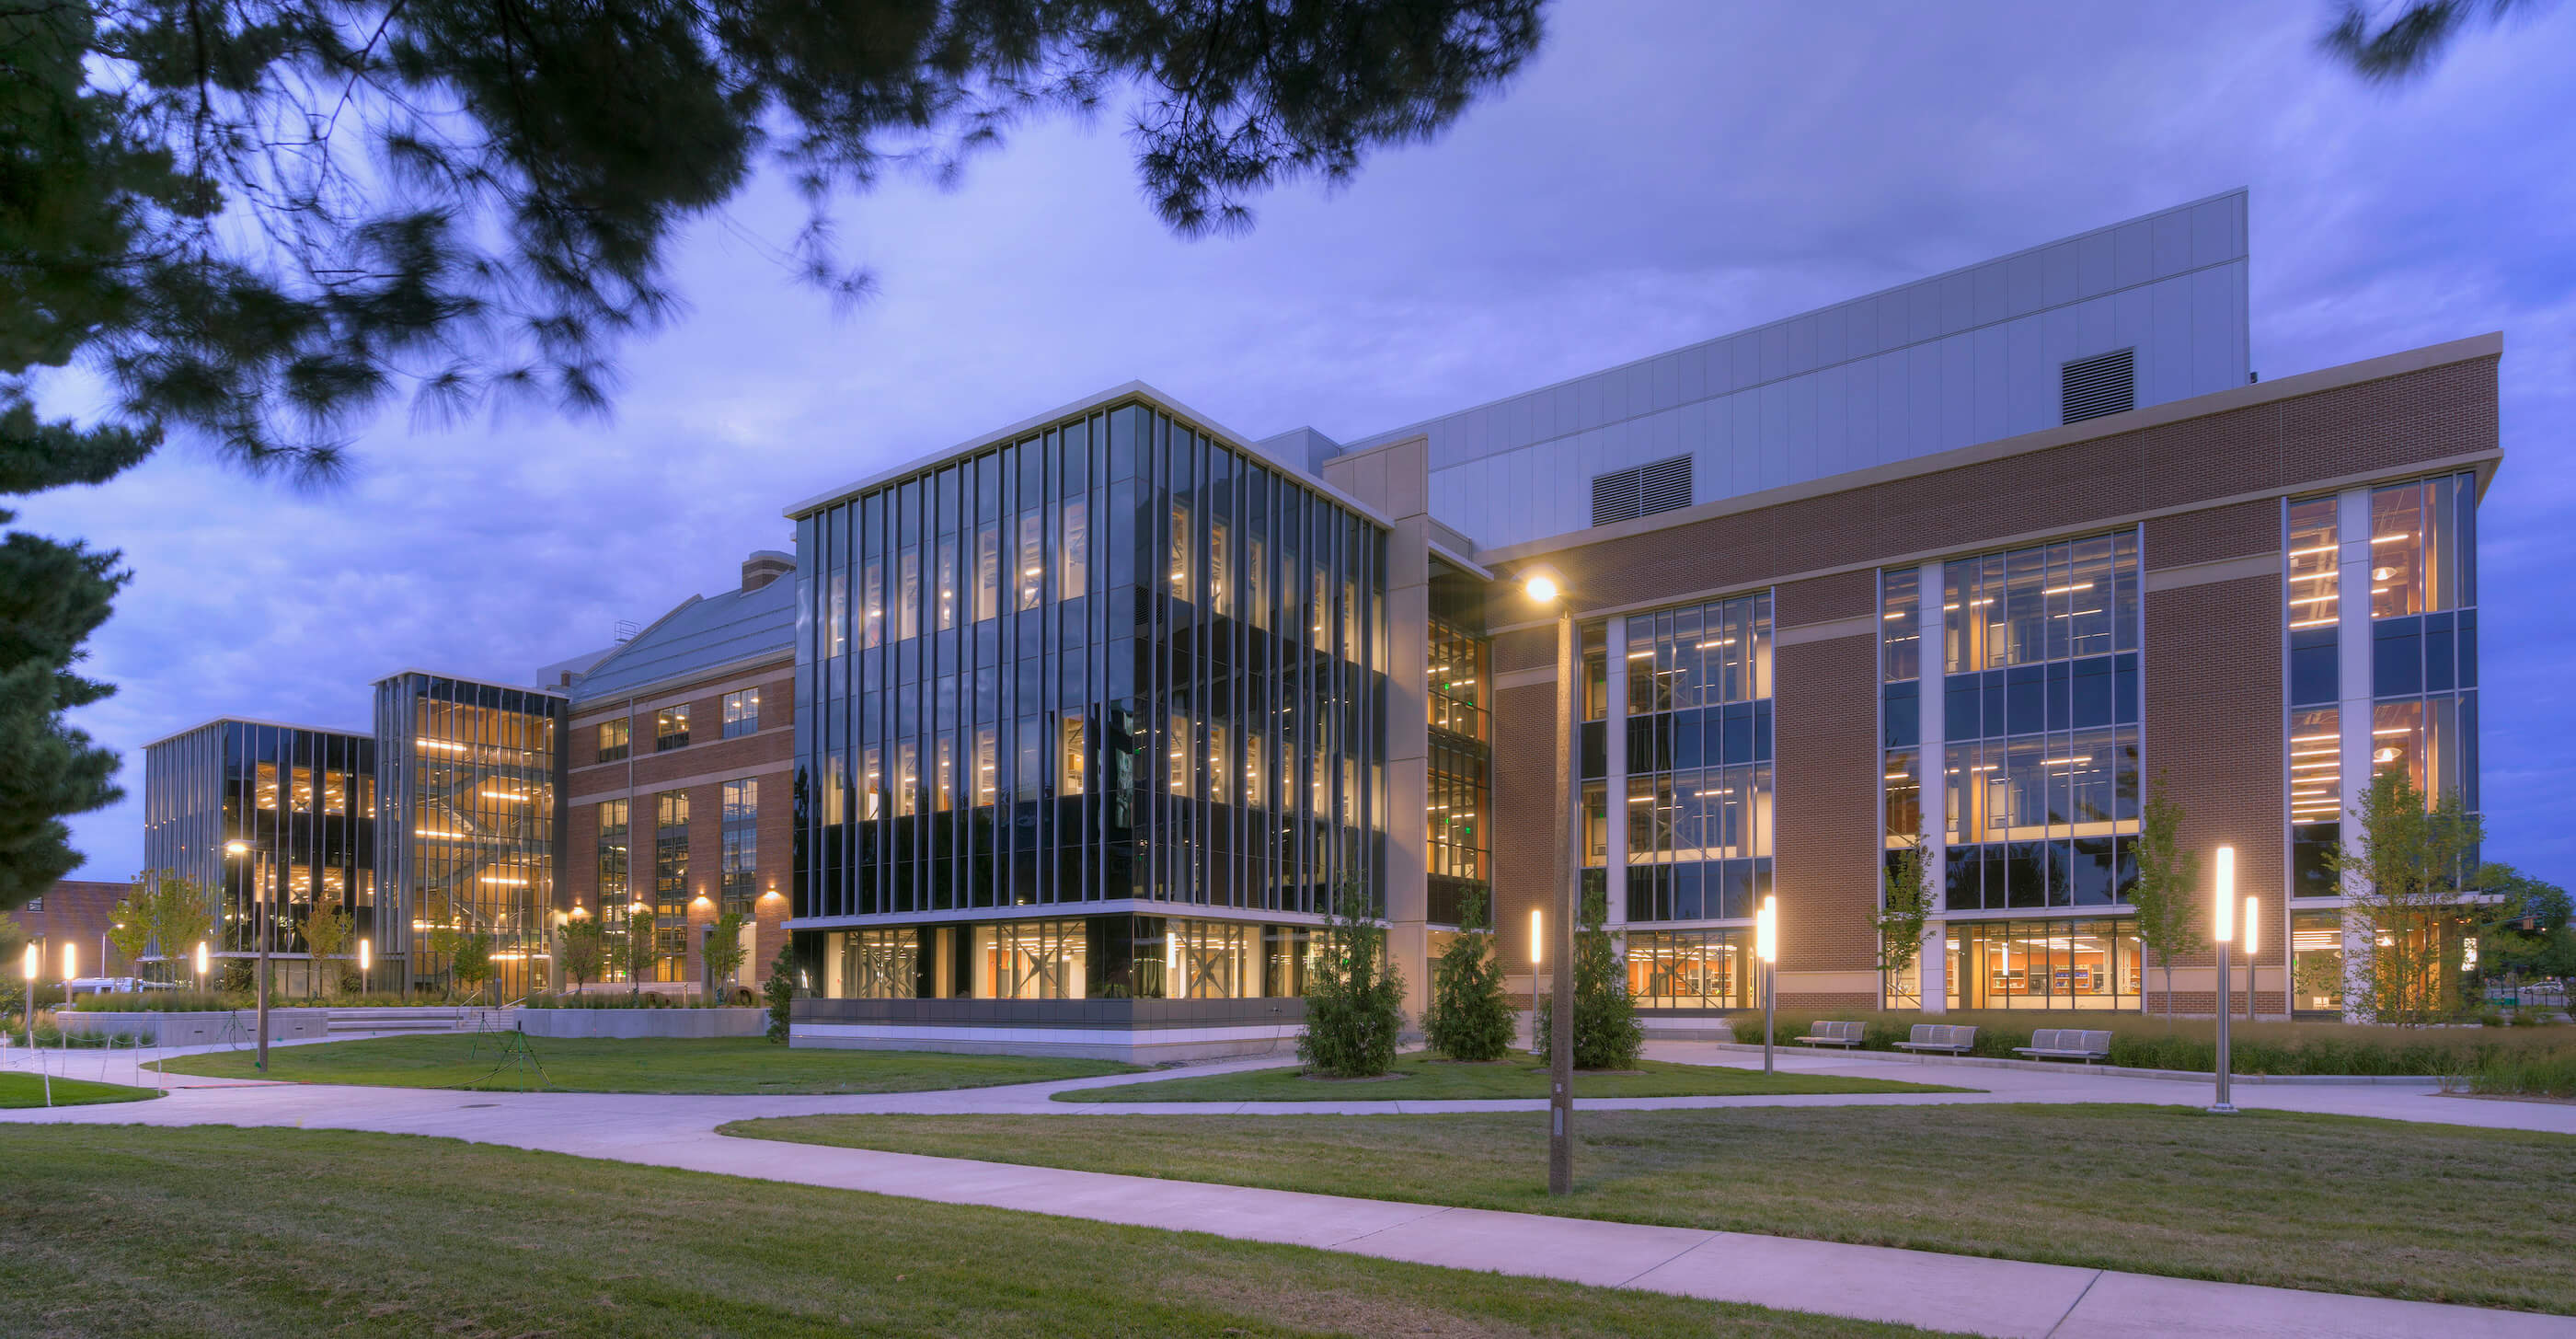 exterior view of a large campus research building at night